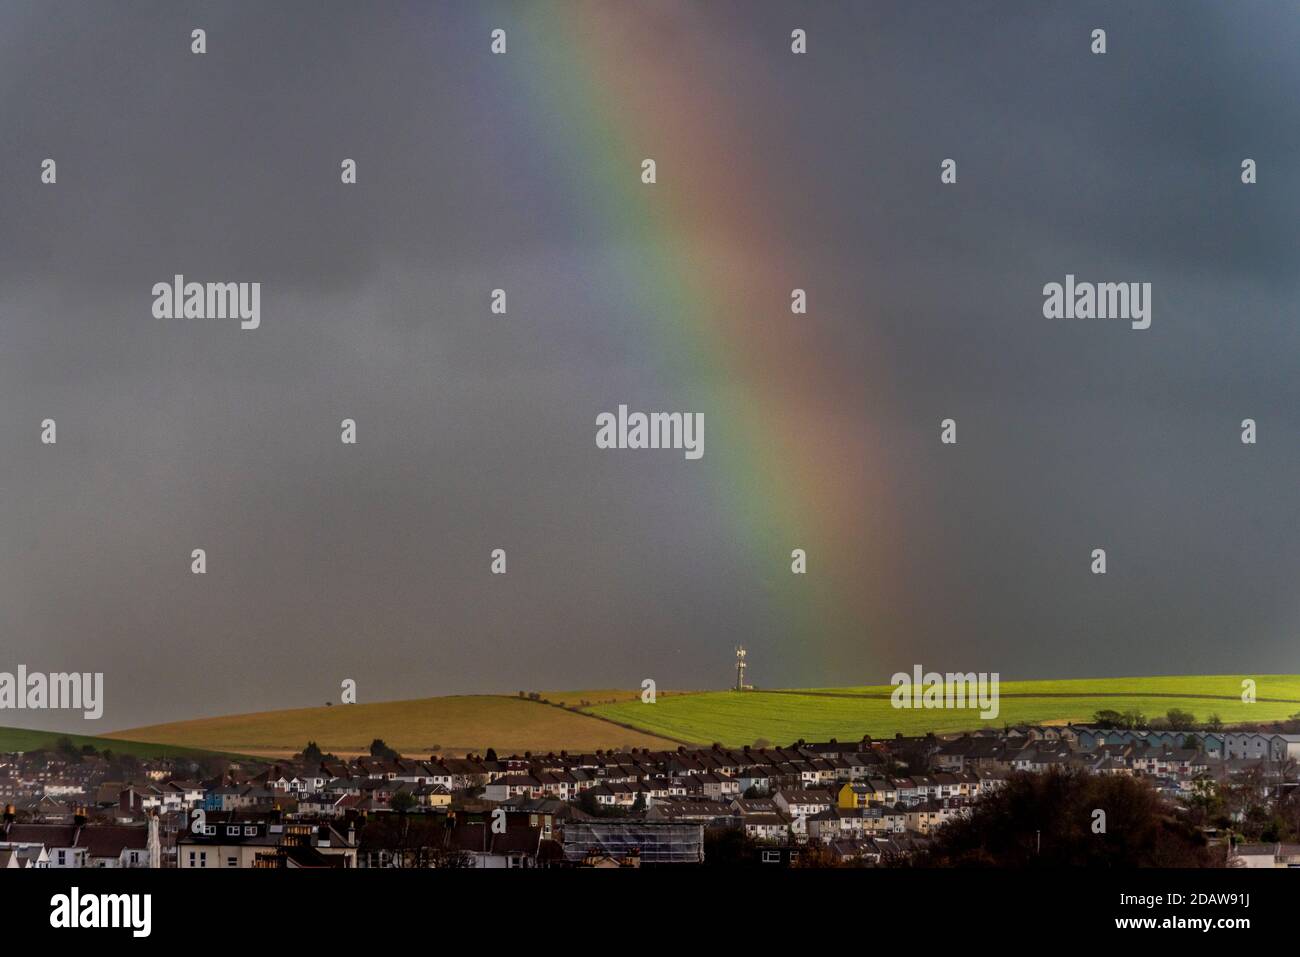 Brighton, November 15th 2020: Changeable weather conditions produced downpours, rainbows and unusual light in the streets of the city this afternoon Credit: Andrew Hasson/Alamy Live News Stock Photo